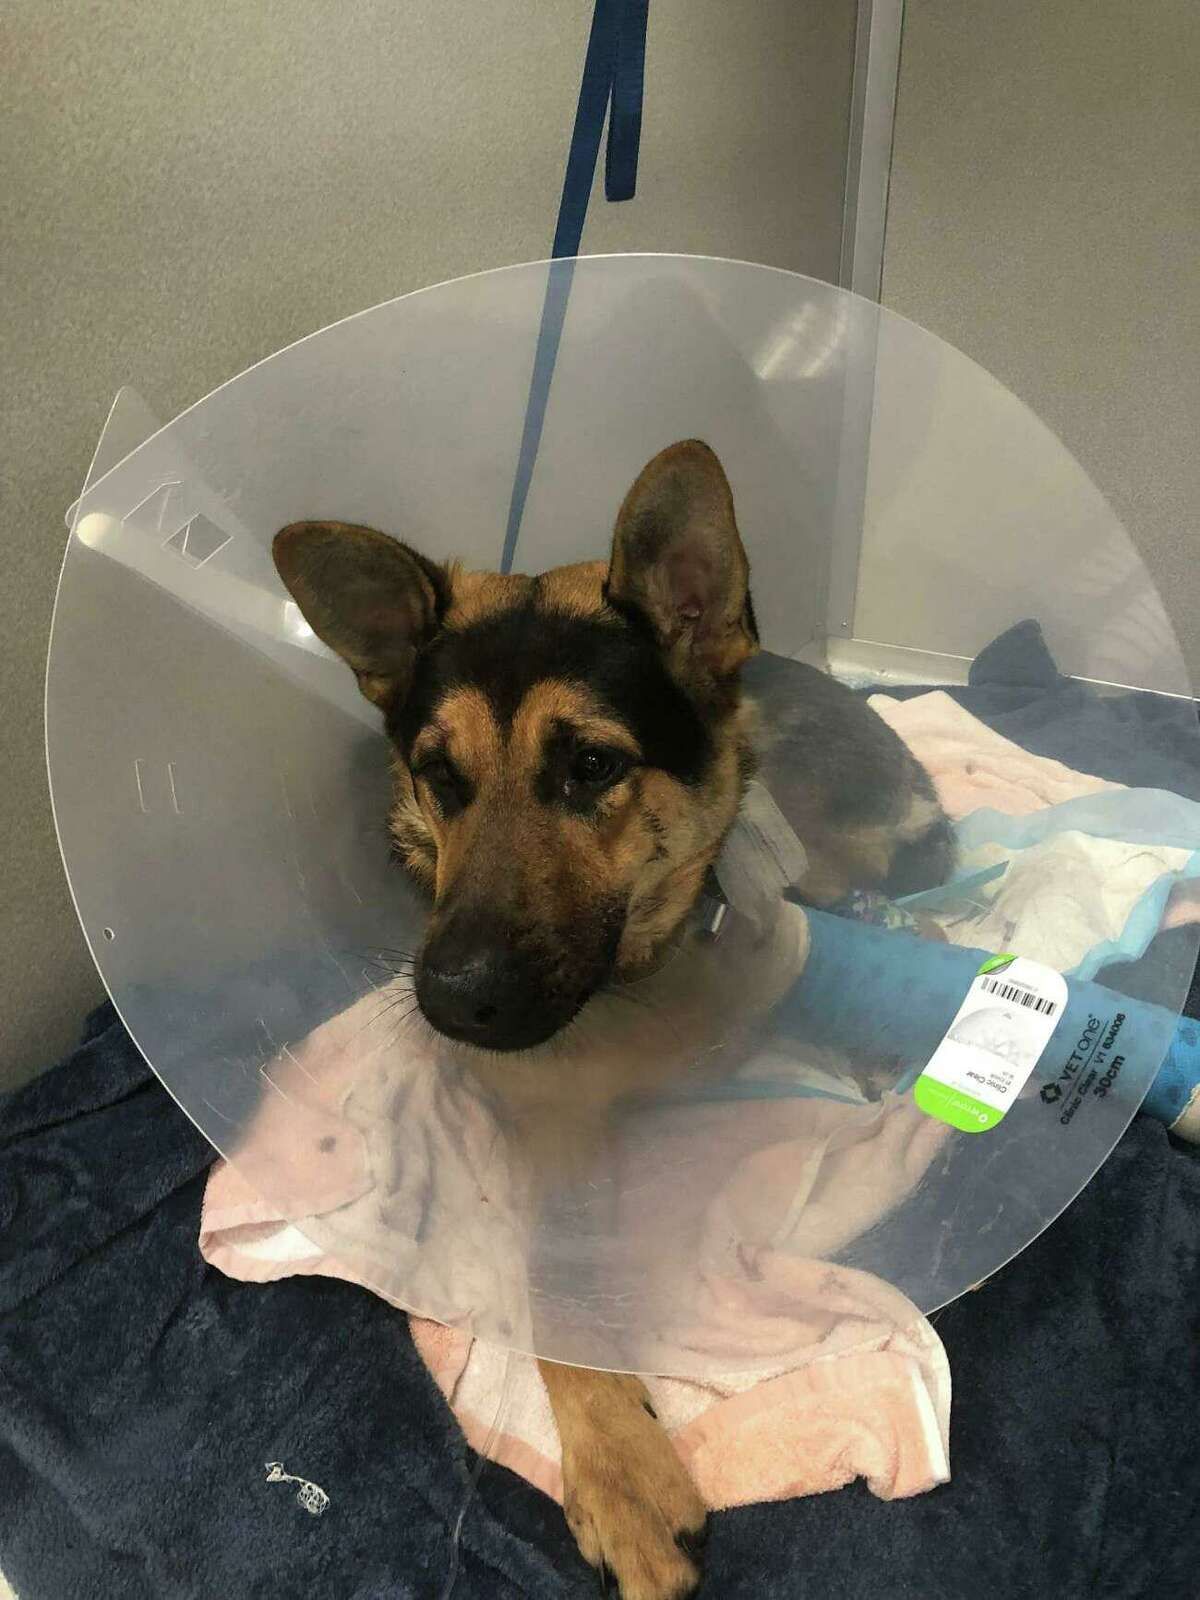 A German Shepherd allegedly shot by his previous owners has been adopted by a new family, Shelton’s animal shelter said Thursday.